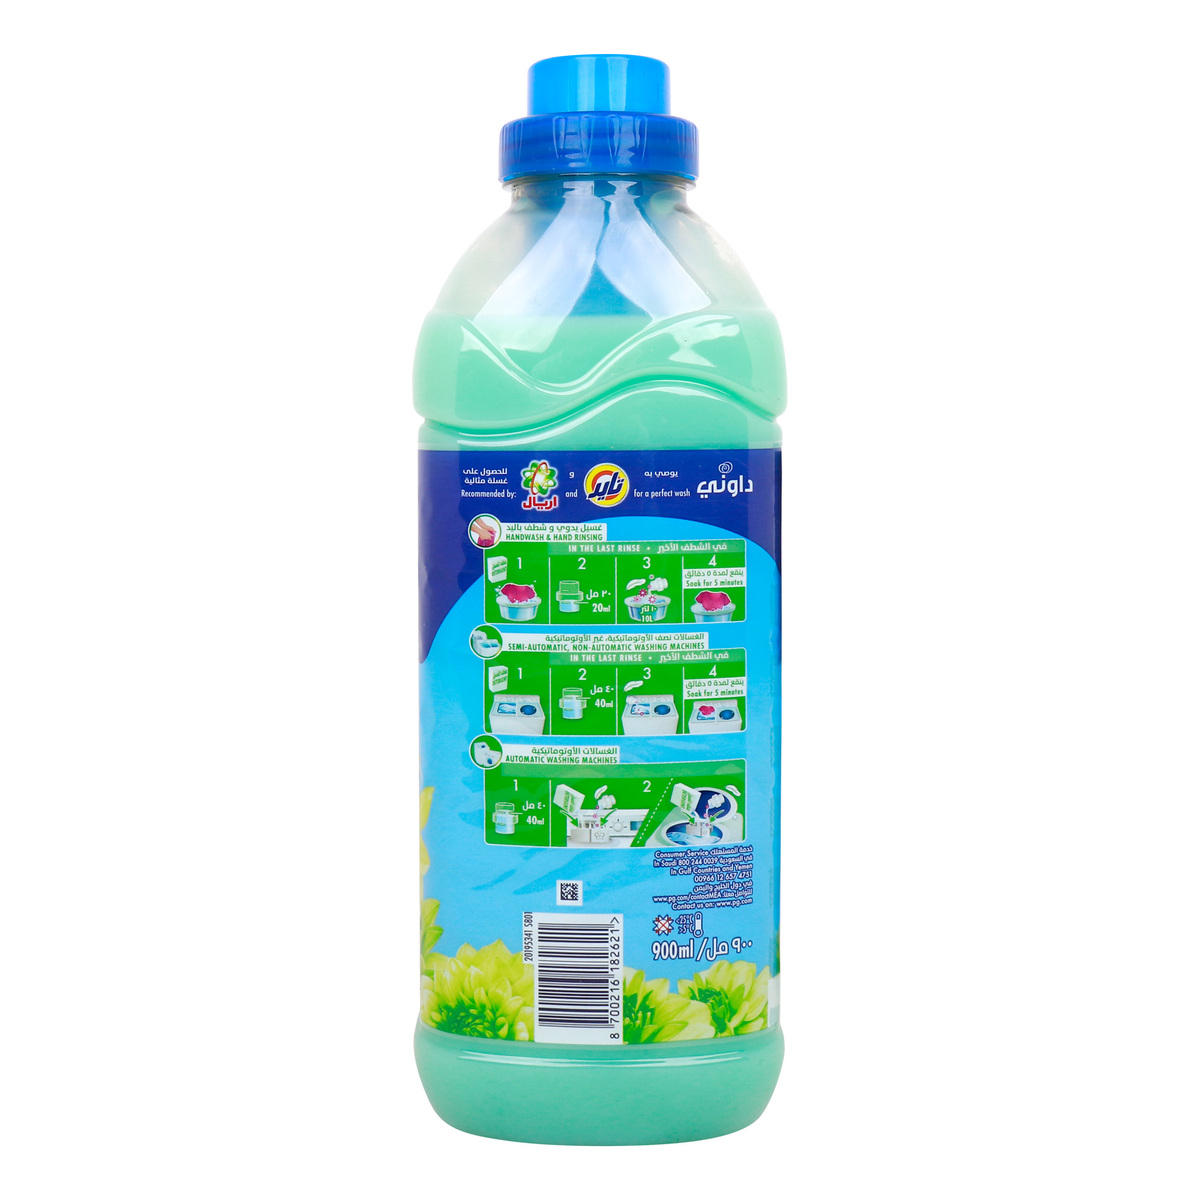 Downy Fabric Softener Concentrated Dream Garden, 900 ml